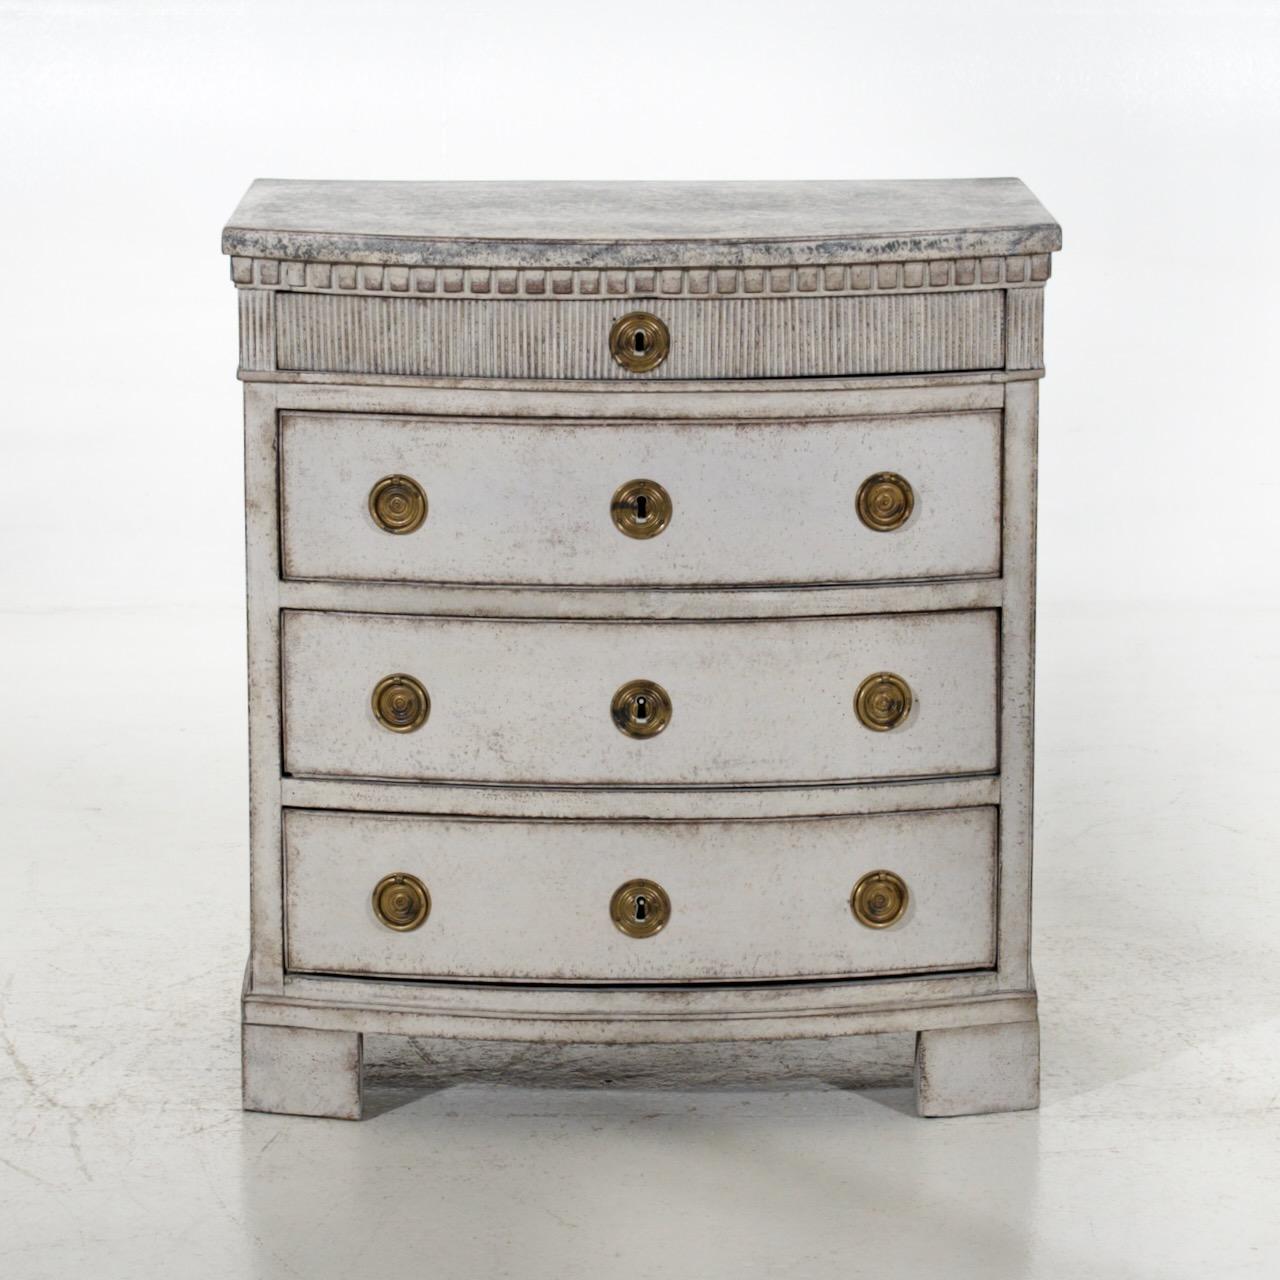 Charming Scandinavian chest, richly carved, with original lock, circa 1810.